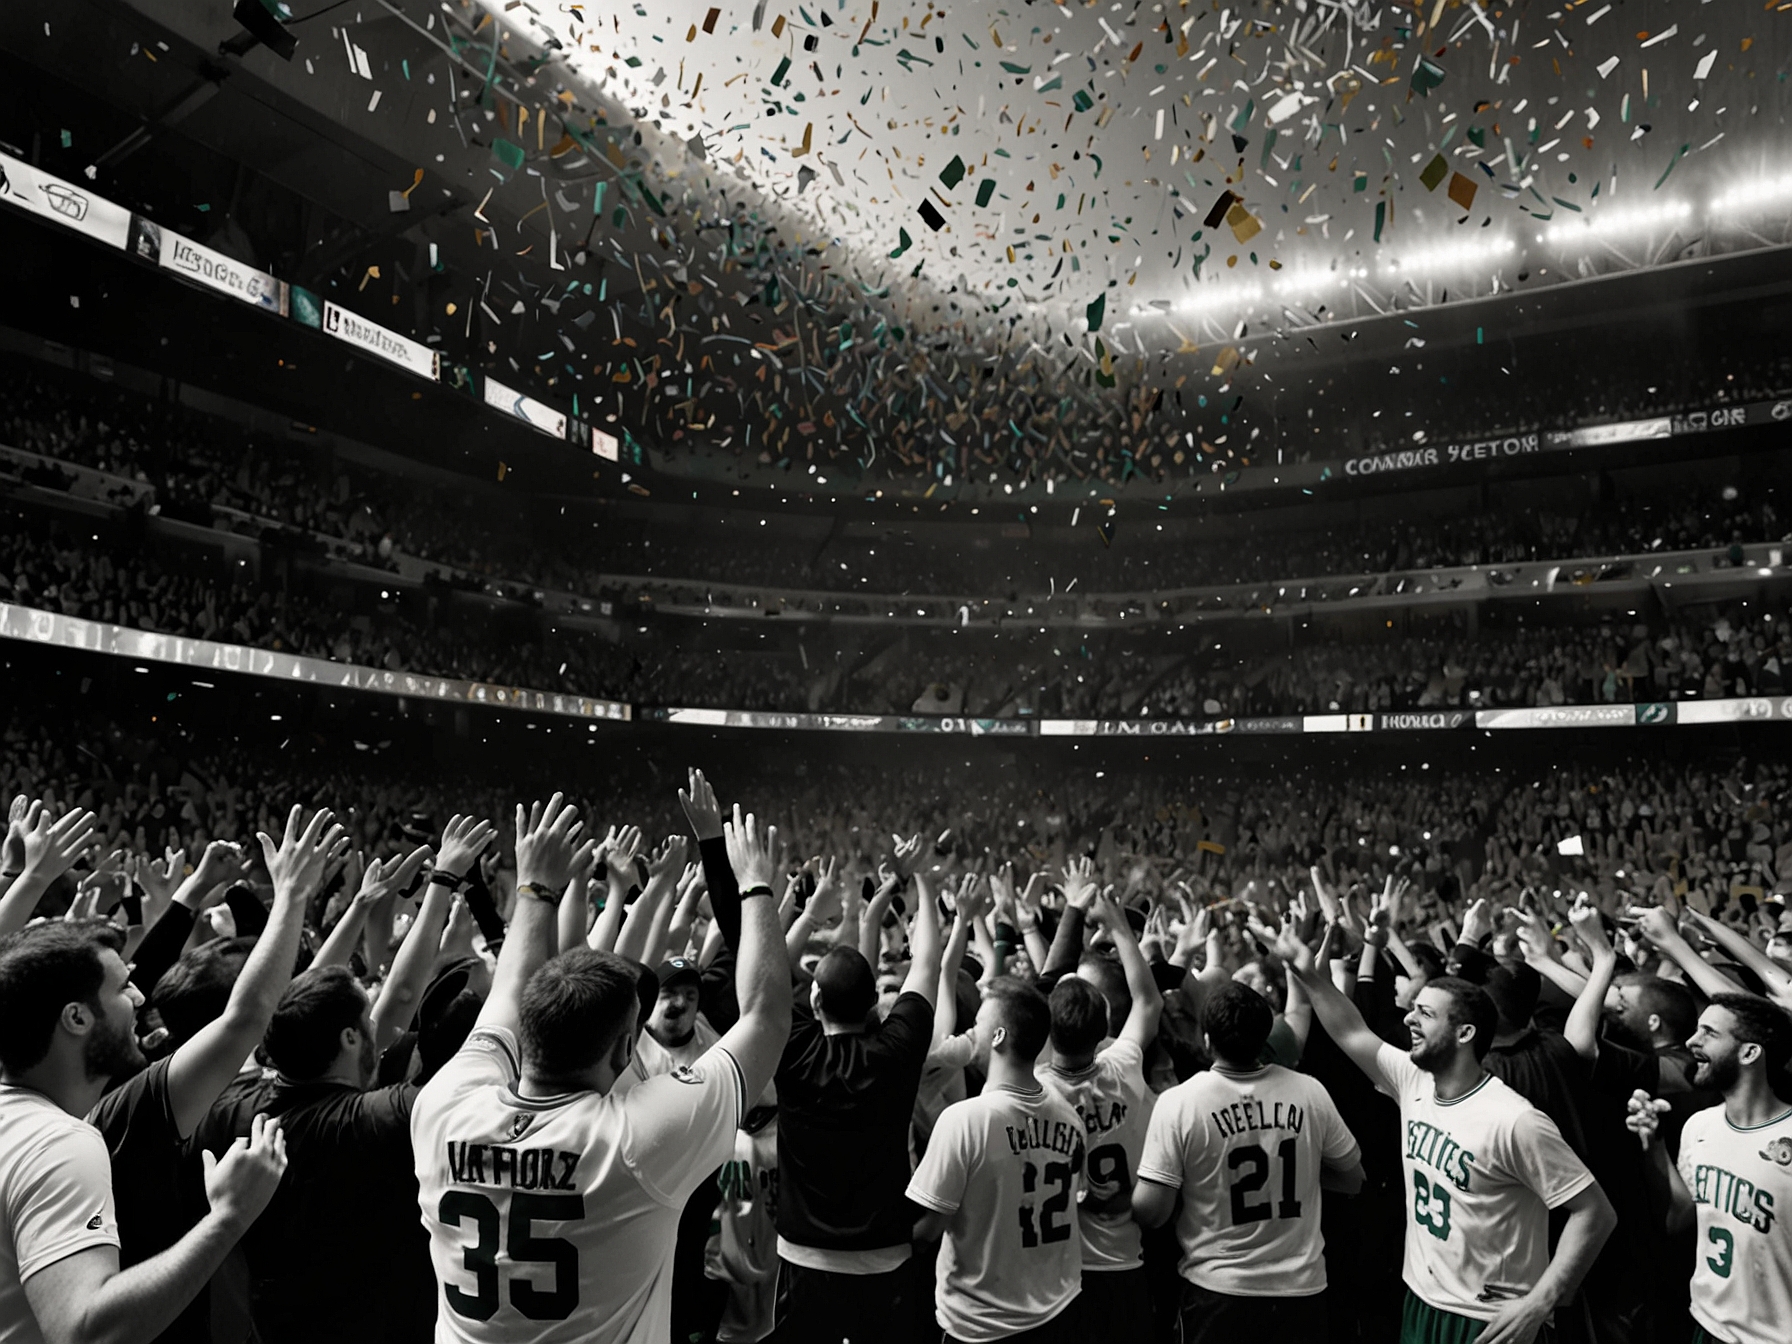 TD Garden filled with ecstatic Boston Celtics fans celebrating their team's 18th NBA Championship victory as confetti rains down on the jubilant players.